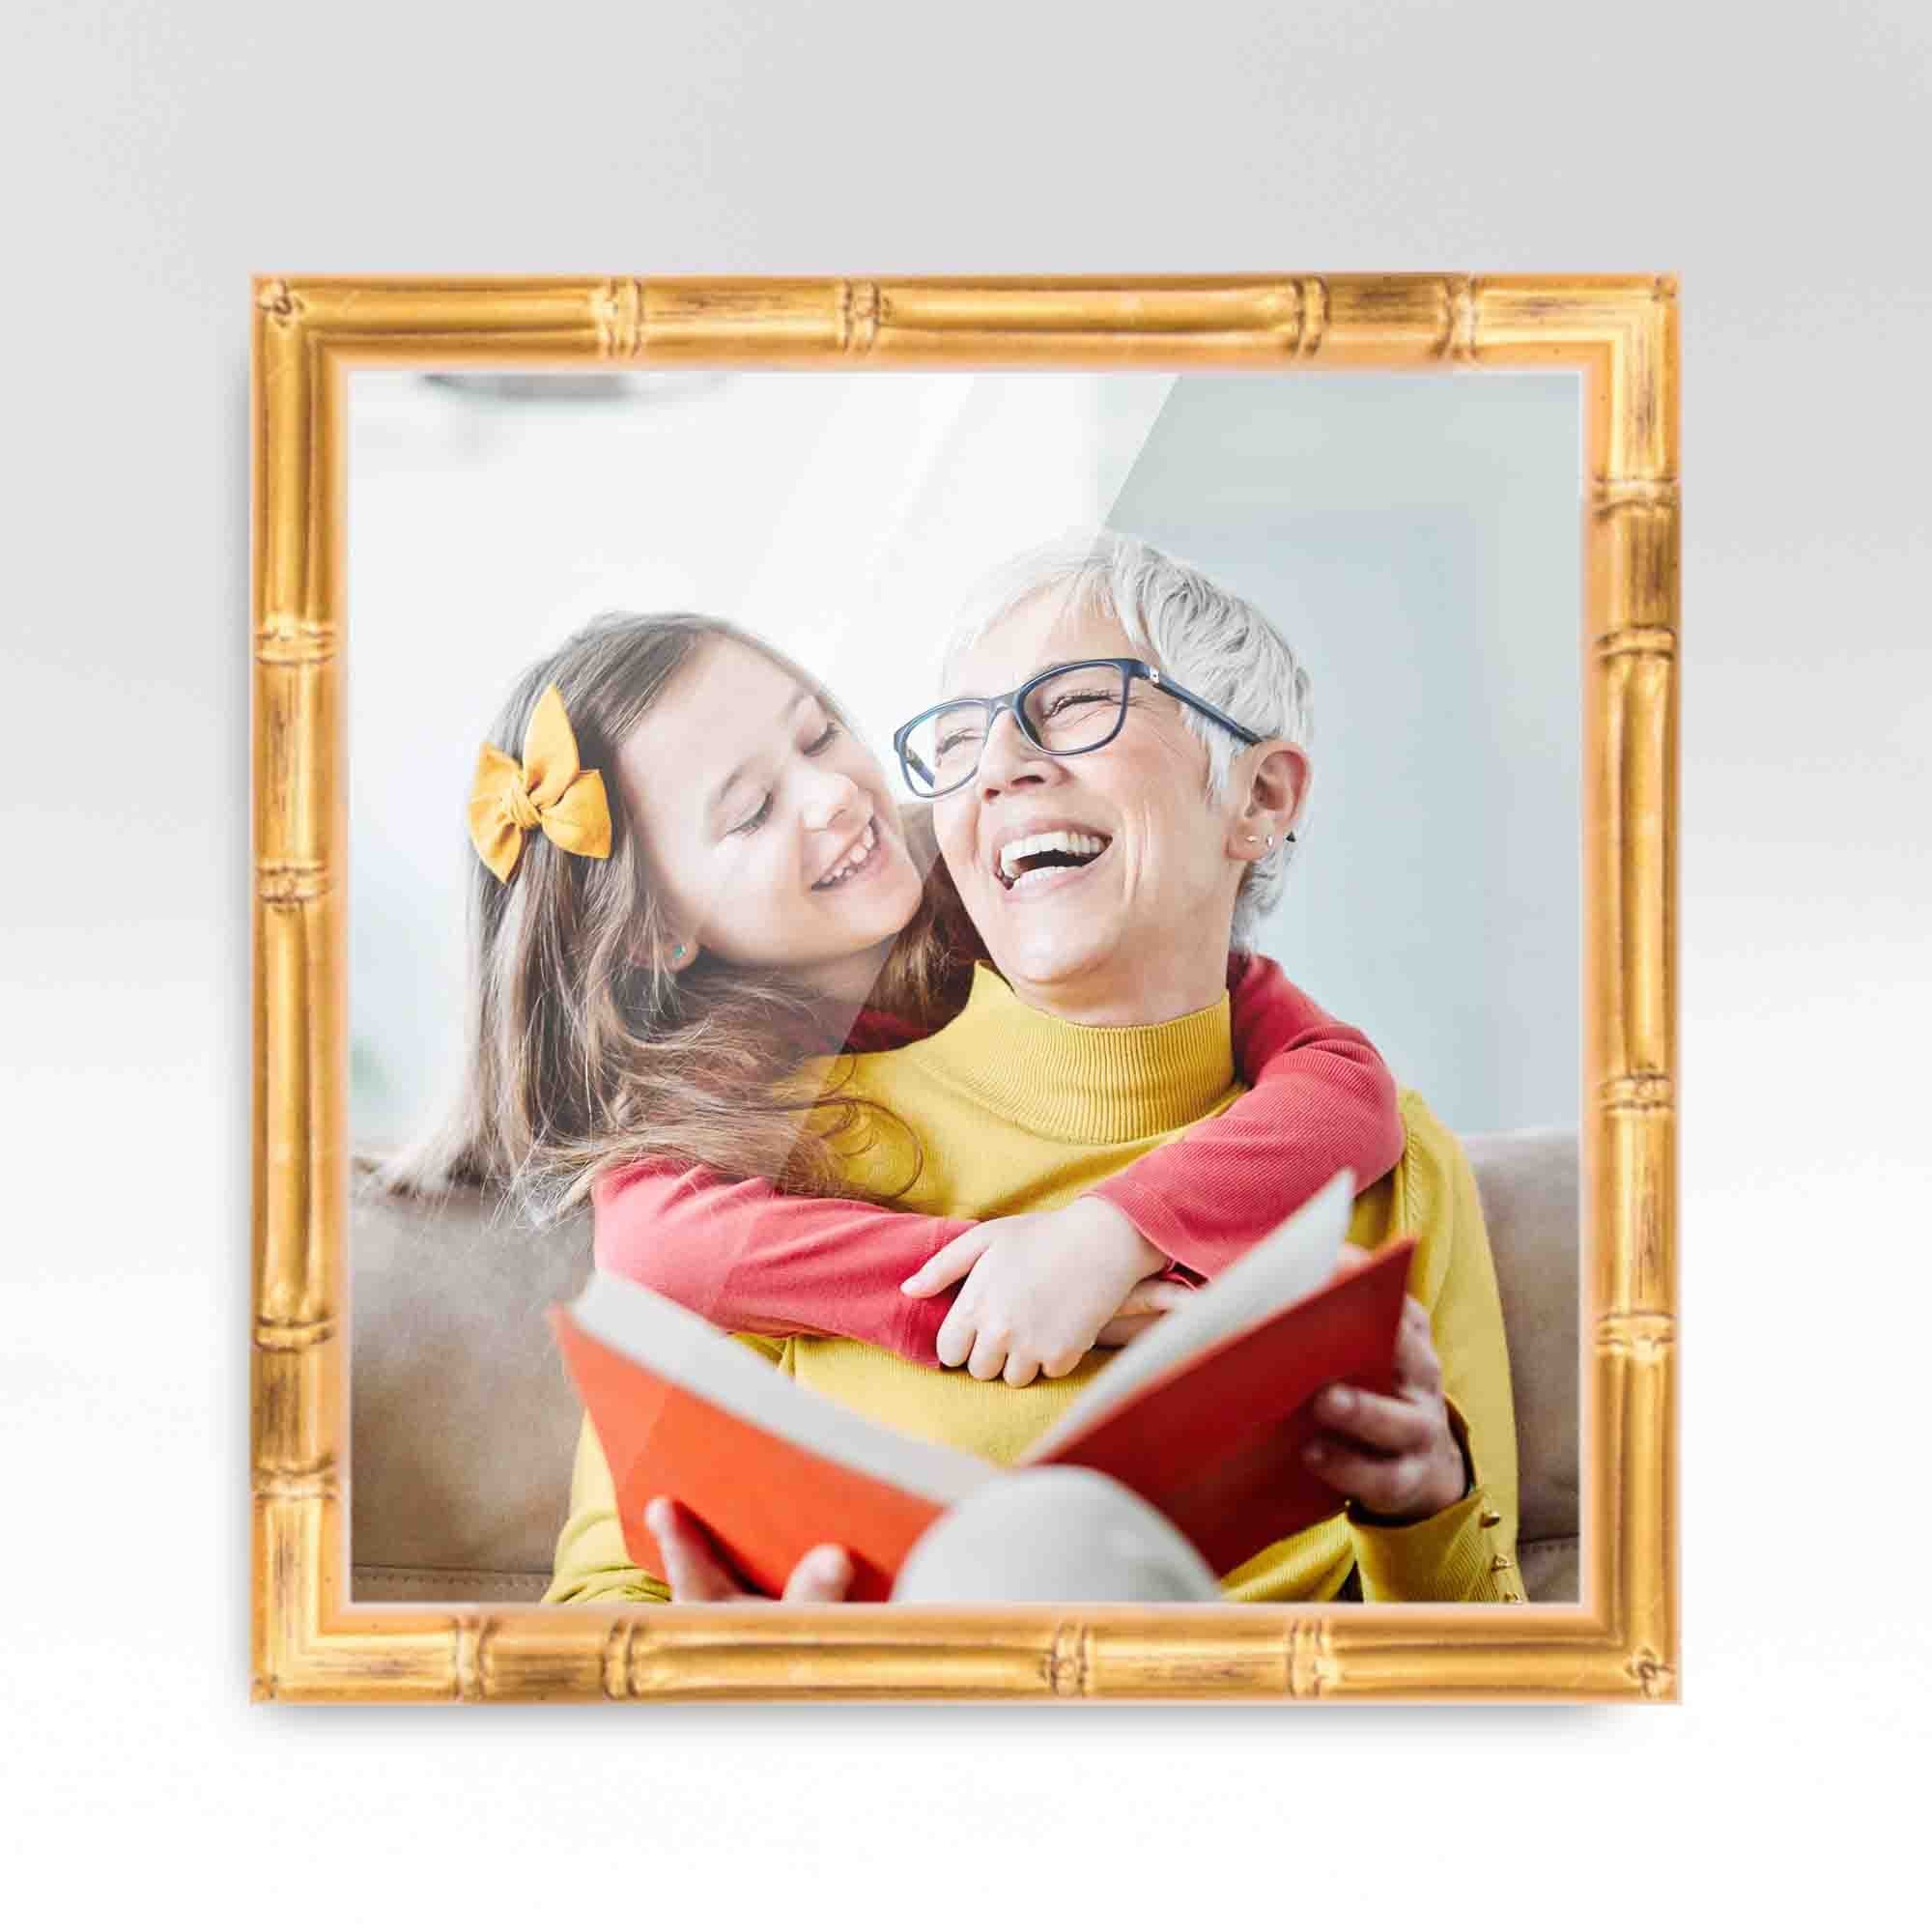 https://ak1.ostkcdn.com/images/products/is/images/direct/d94555f2806d19175619c1c3a9bd7c07fafeac66/6x6-Picture-Frame---Contemporary-Picture-Frame-Complete-With-UV.jpg